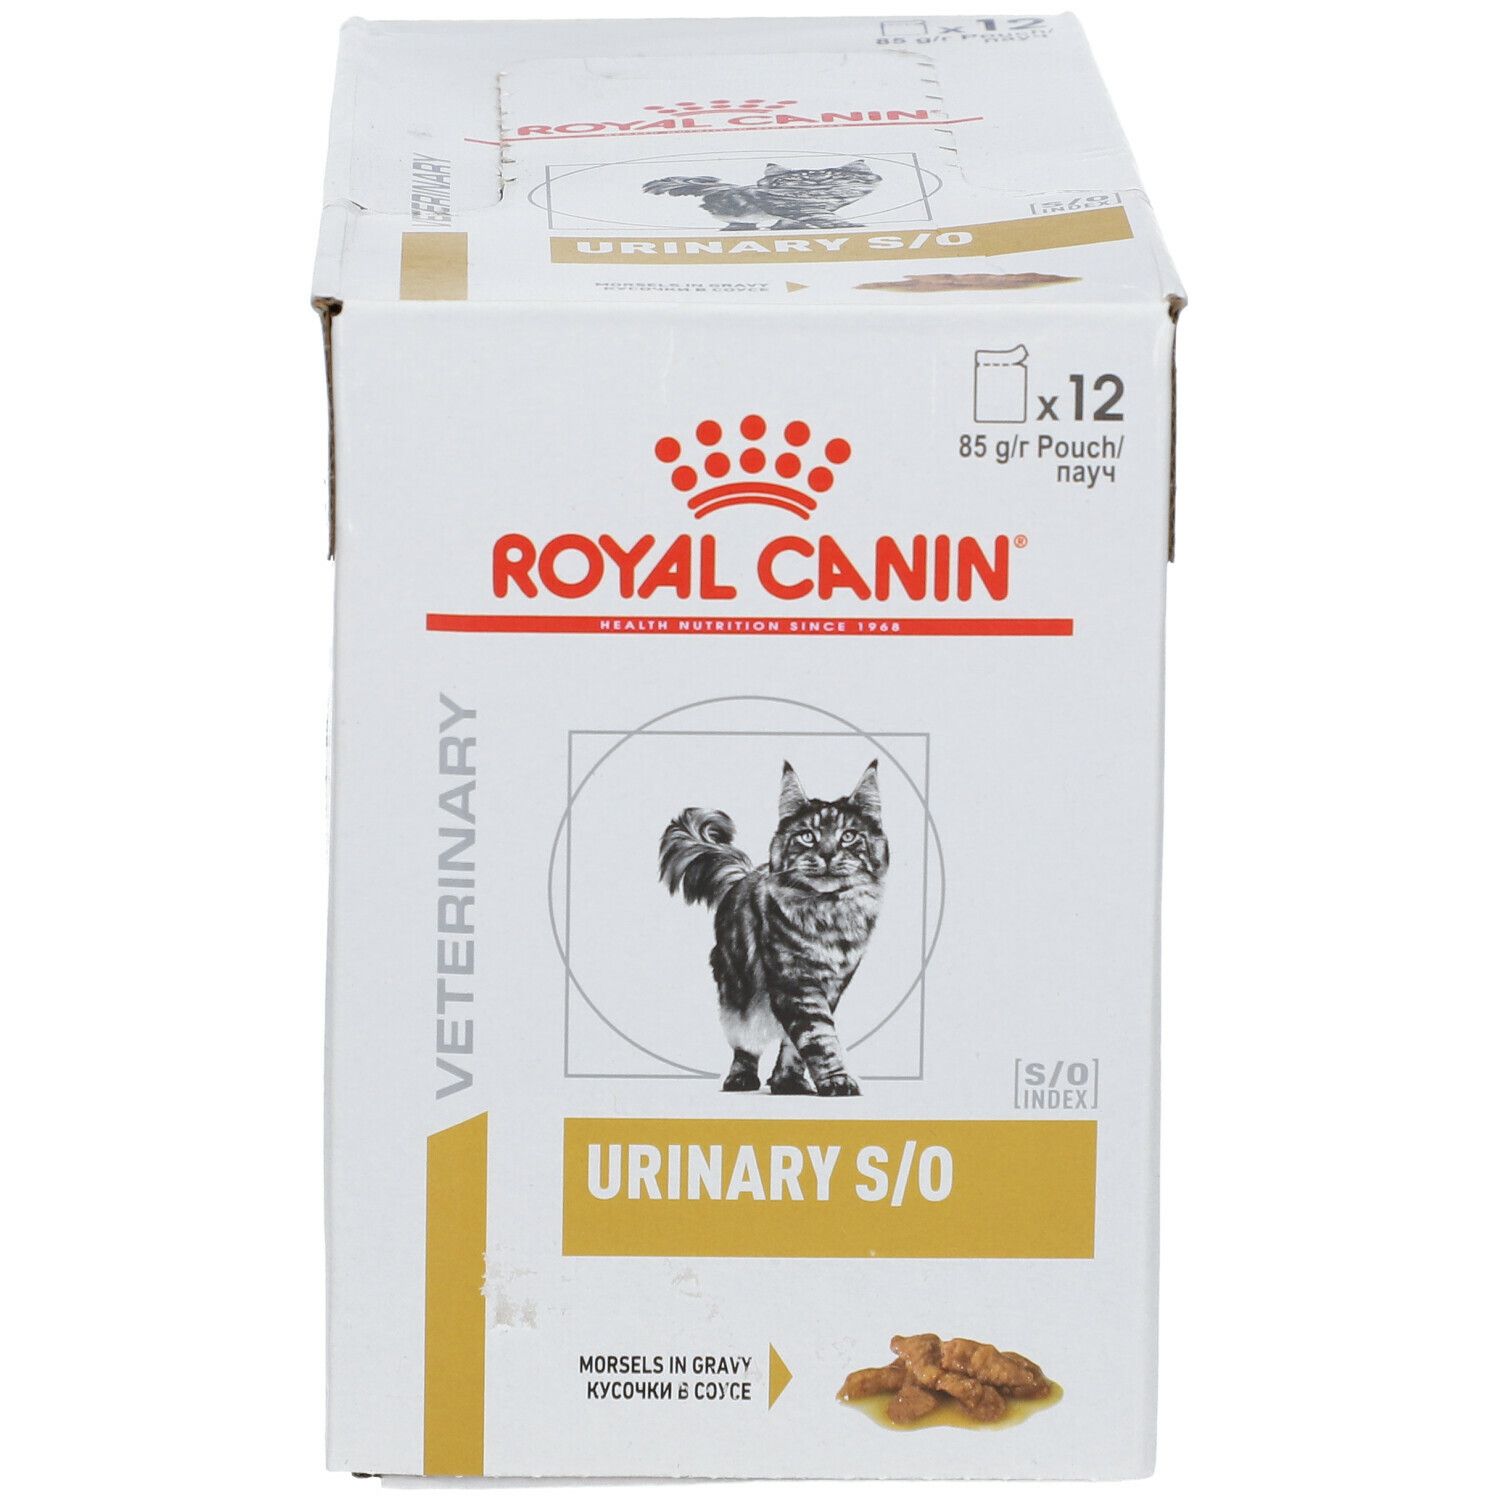 ROYAL CANIN Veterinary Urinary S/O Mousse